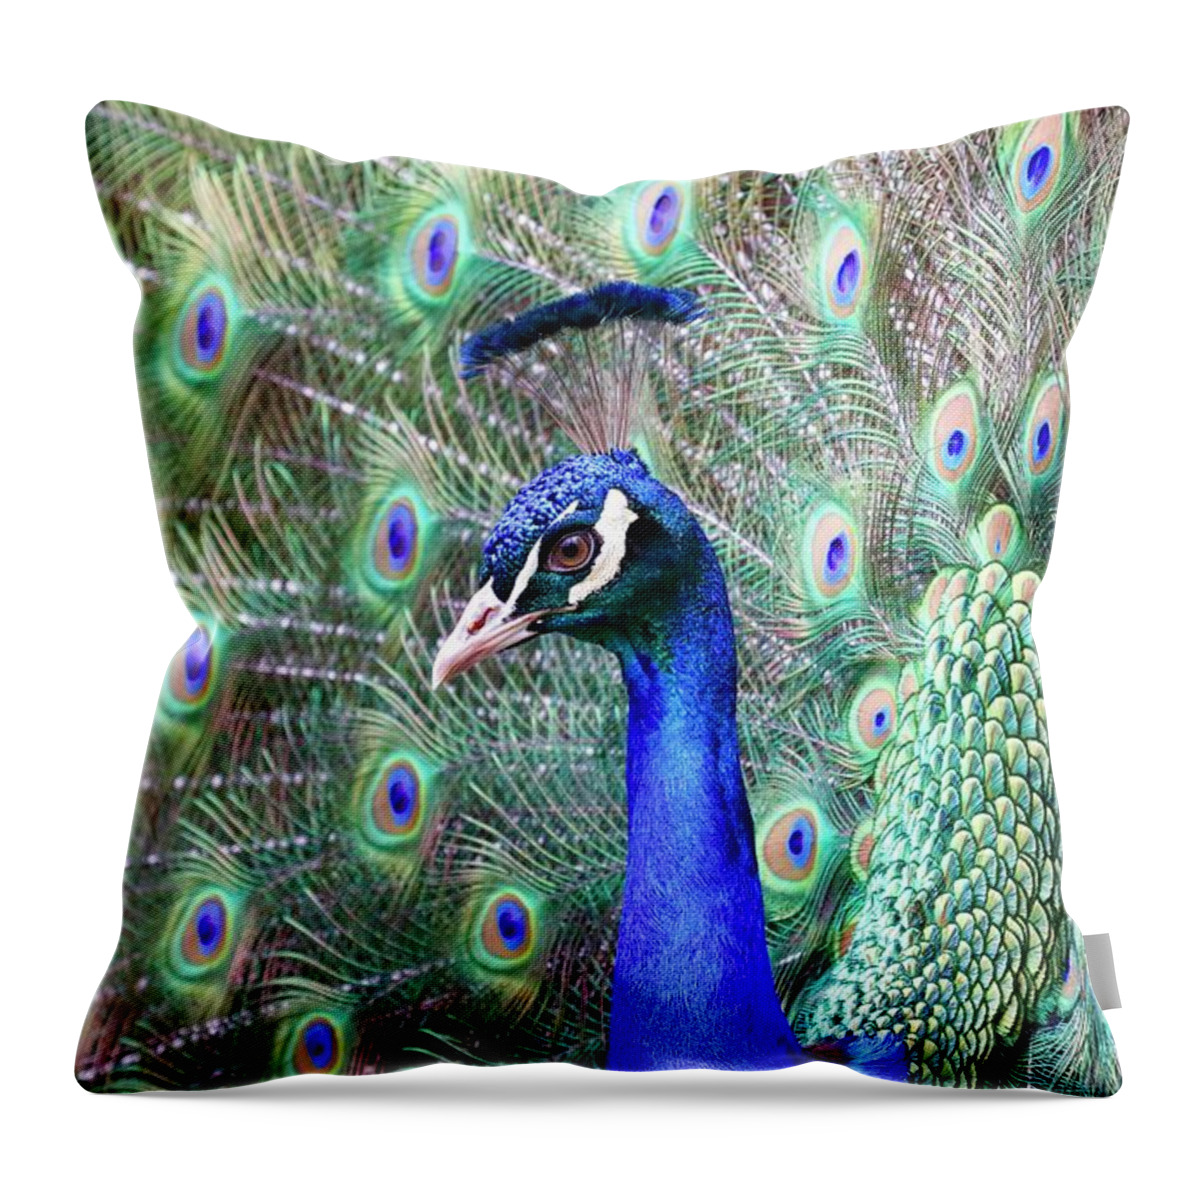 Peacock Throw Pillow featuring the photograph Peacock Bloom by Steve McKinzie